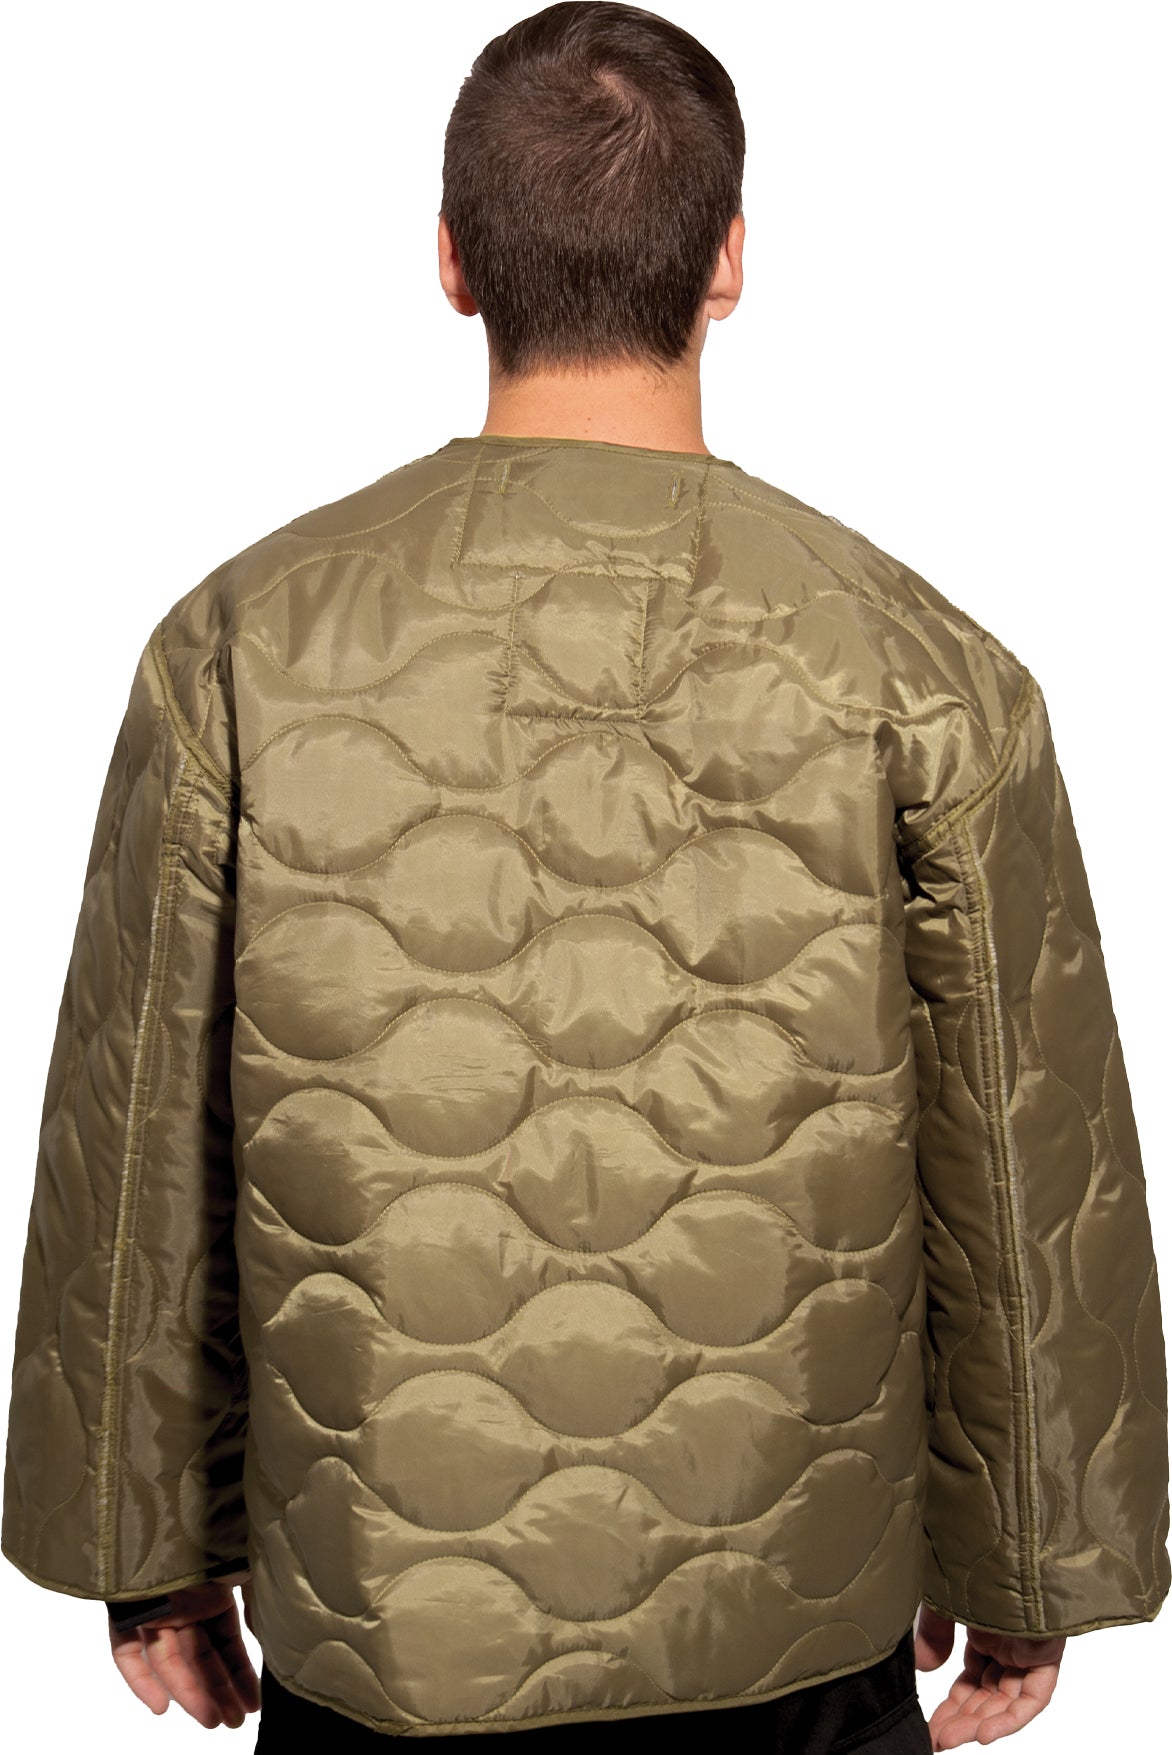 Coyote Brown - M-65 Field Jacket Liner - Galaxy Army Navy